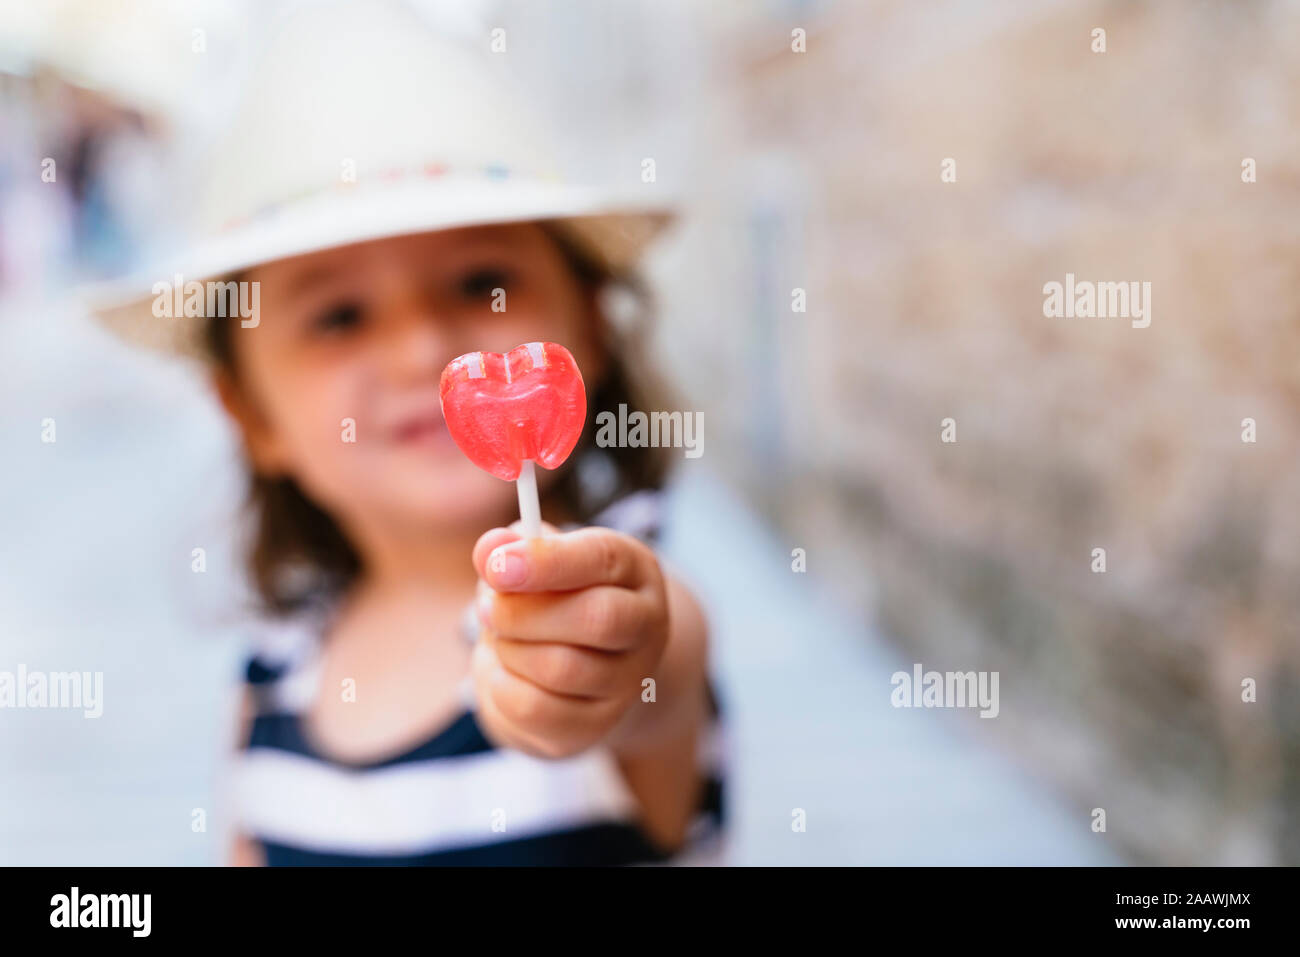 Little girl's hand holding heart-shaped lollipop, close-up Stock Photo